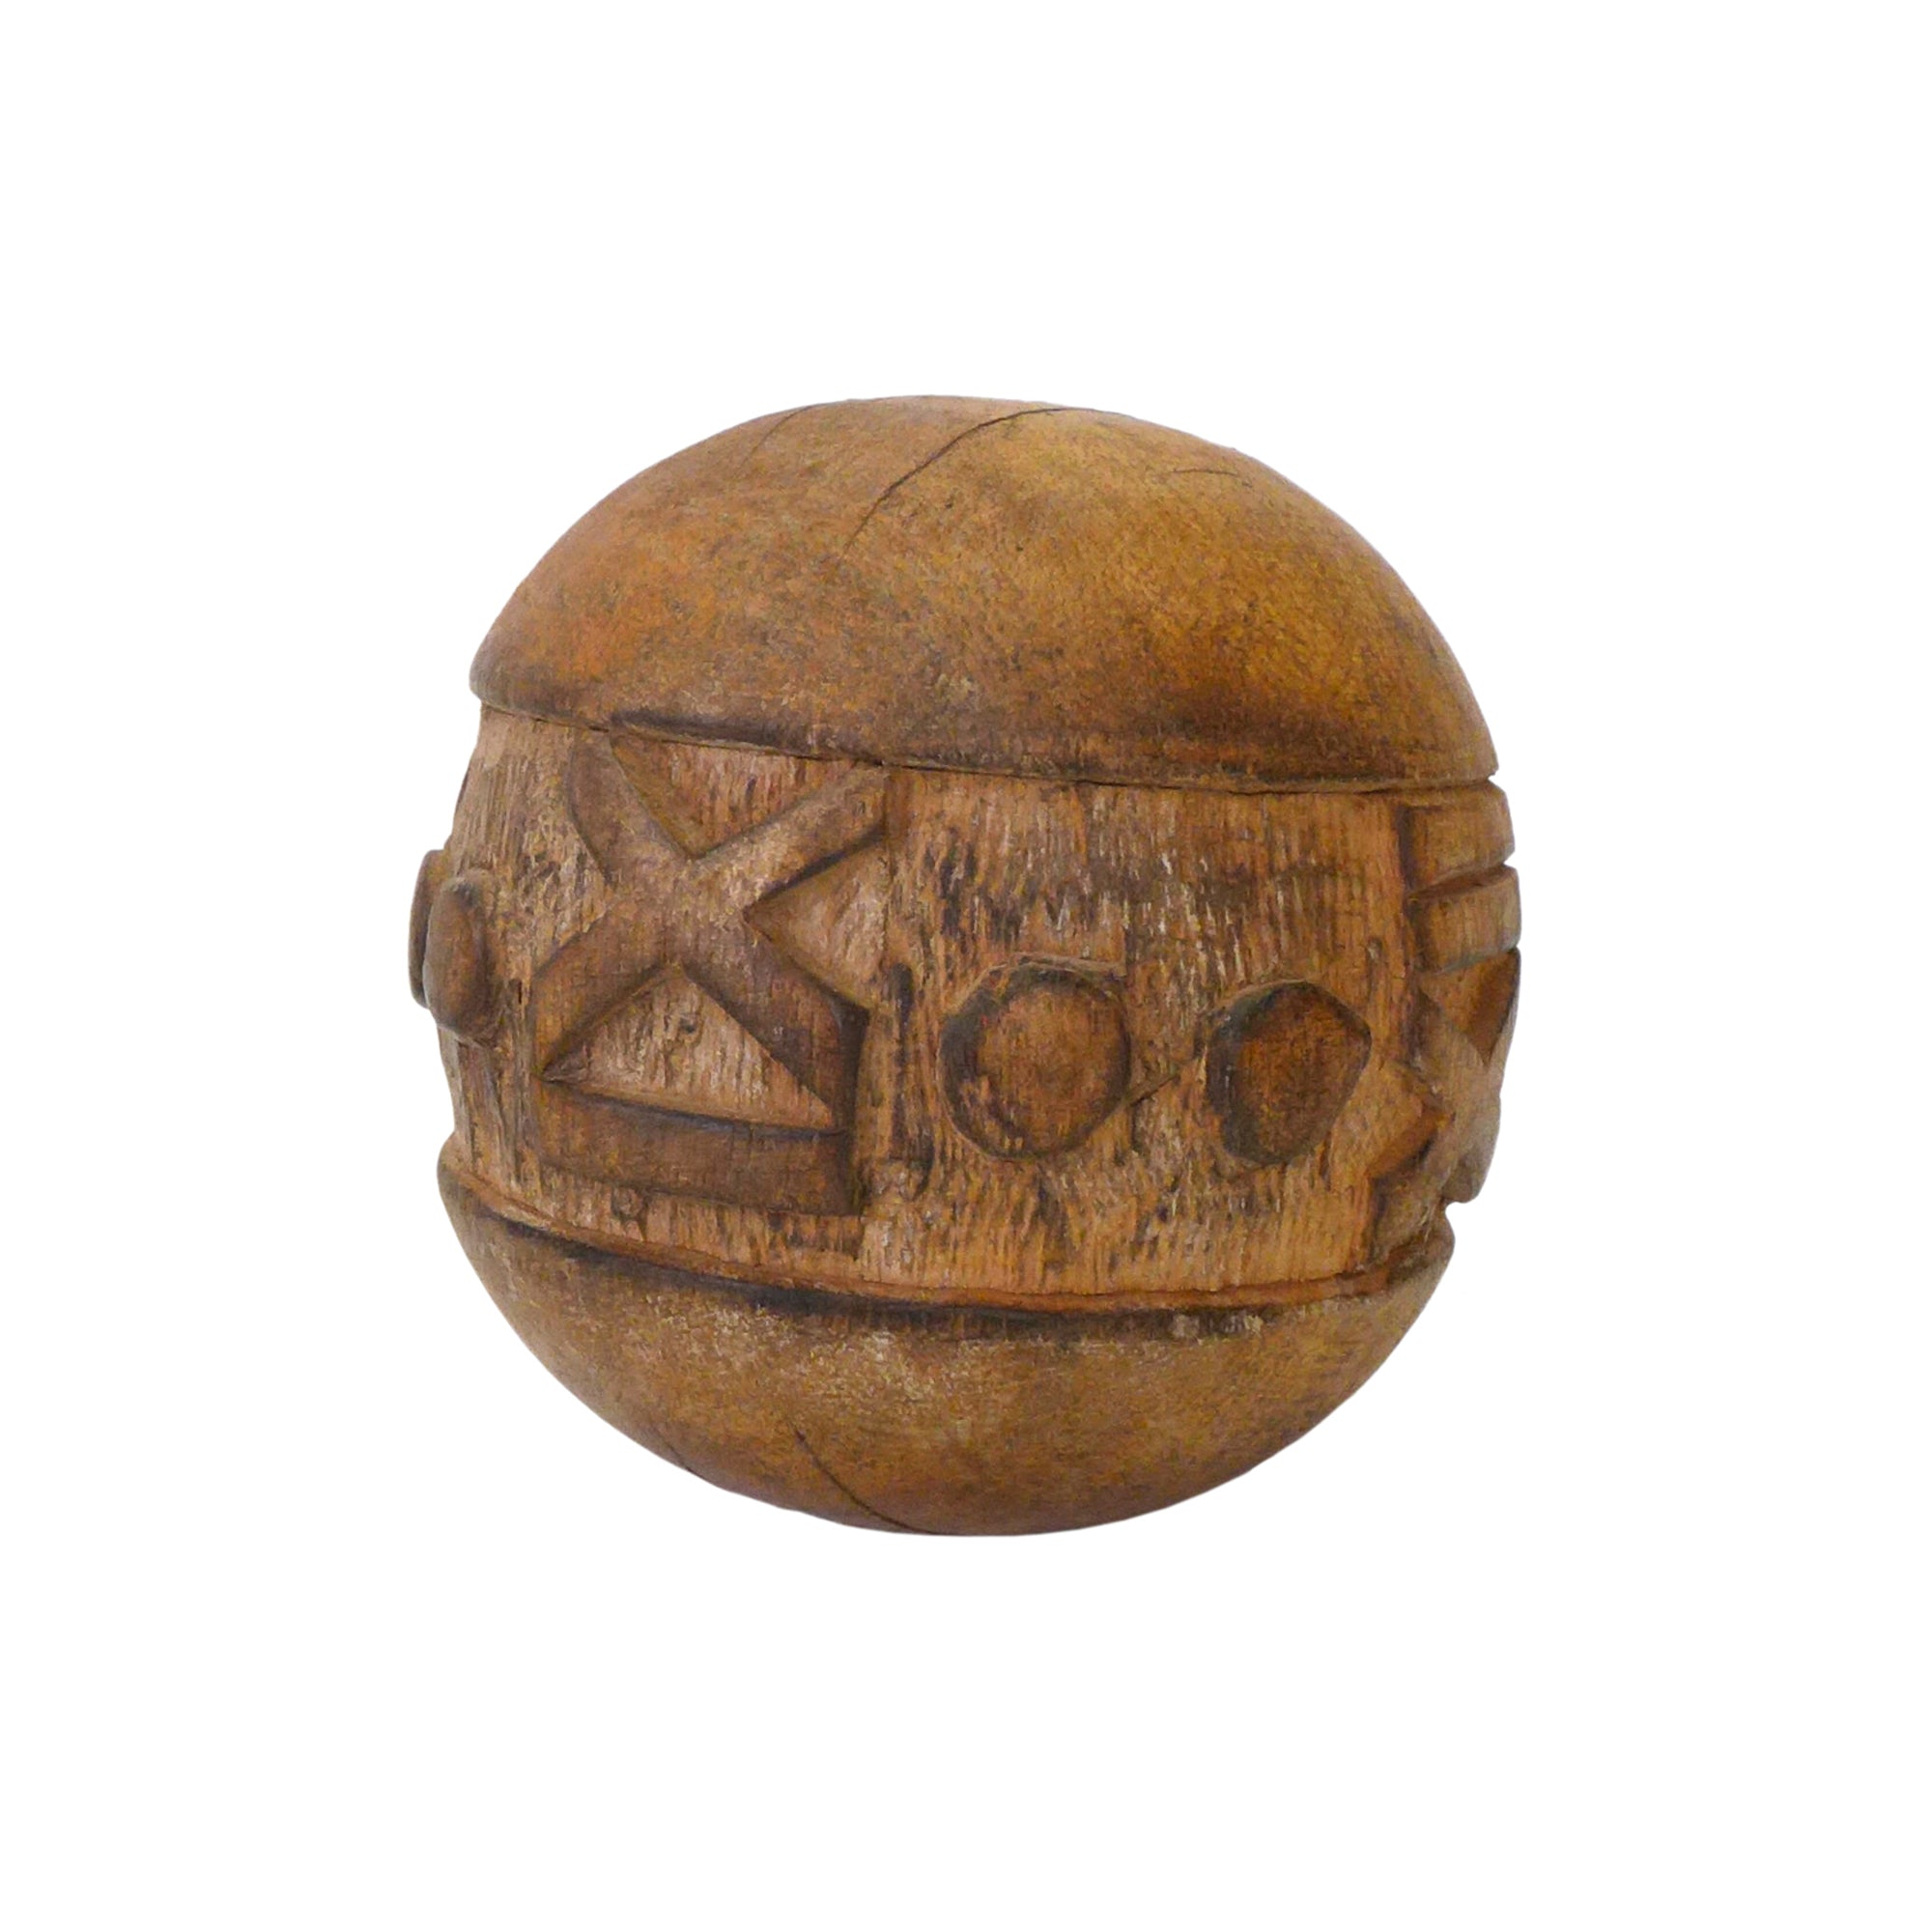 Carved Wood Ball with Roman Numerals